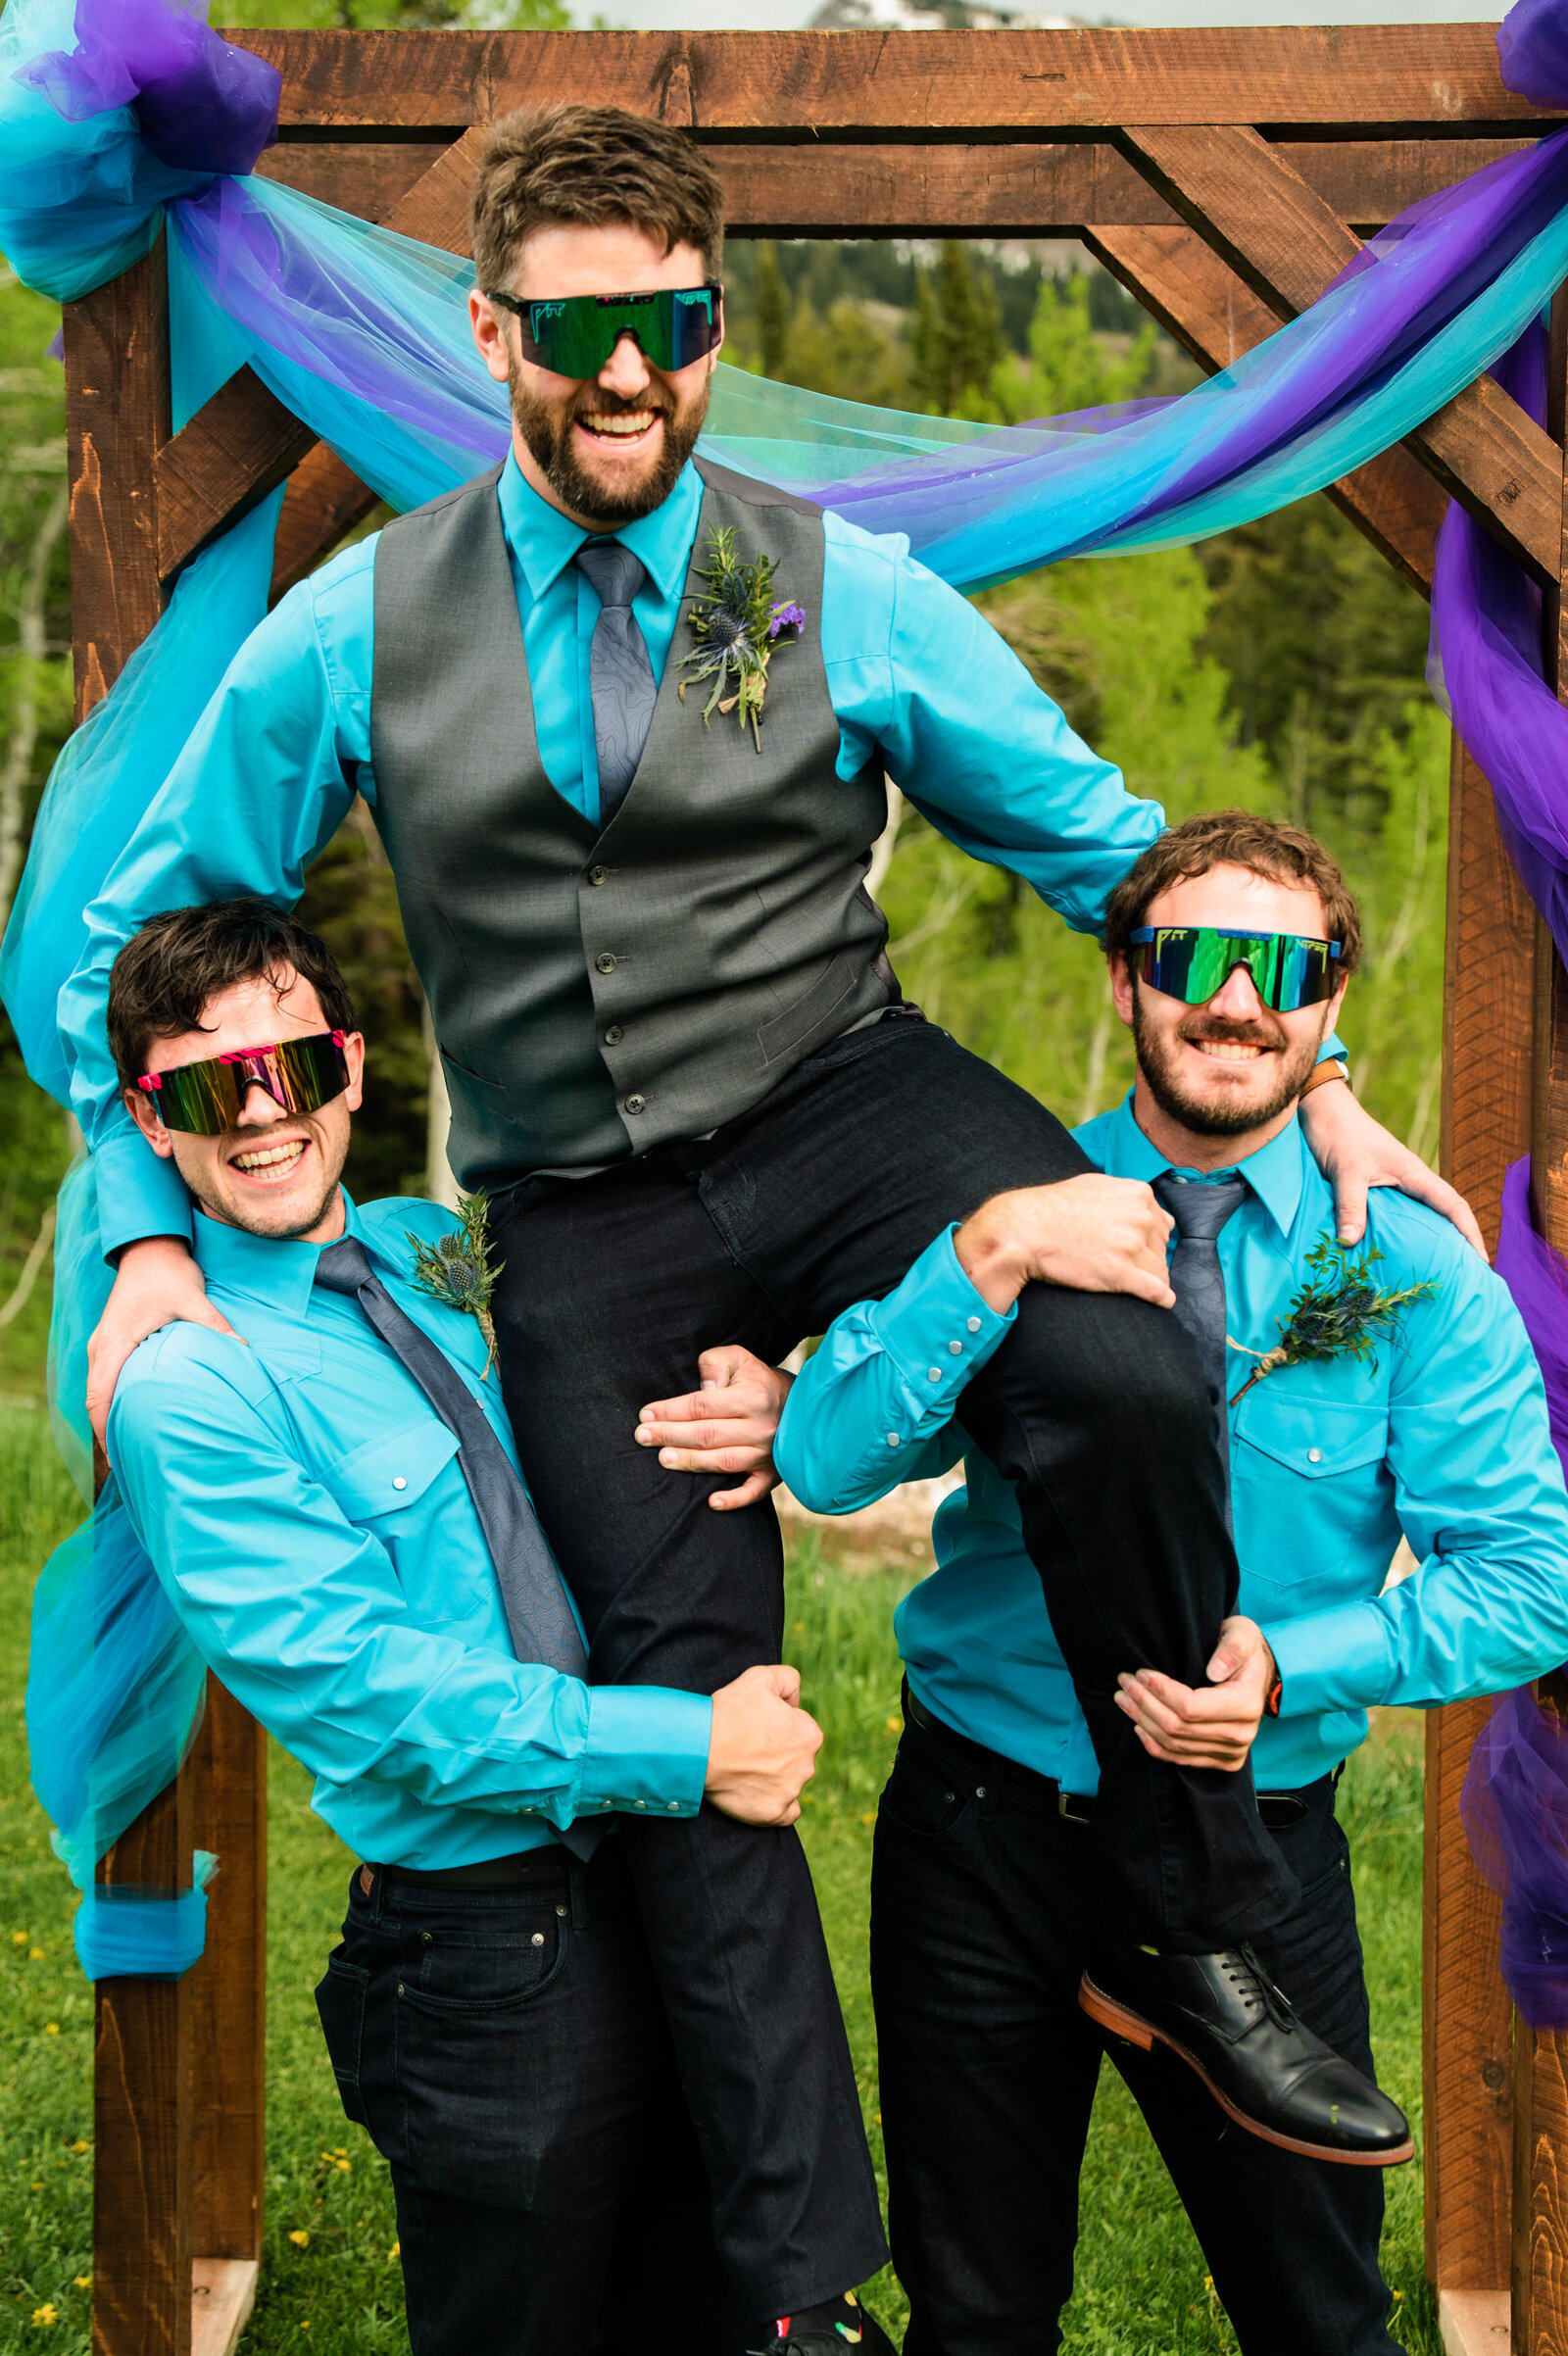 Jackson Hole videographer captures groom being lifted up by wedding party after Jackson Hole elopement